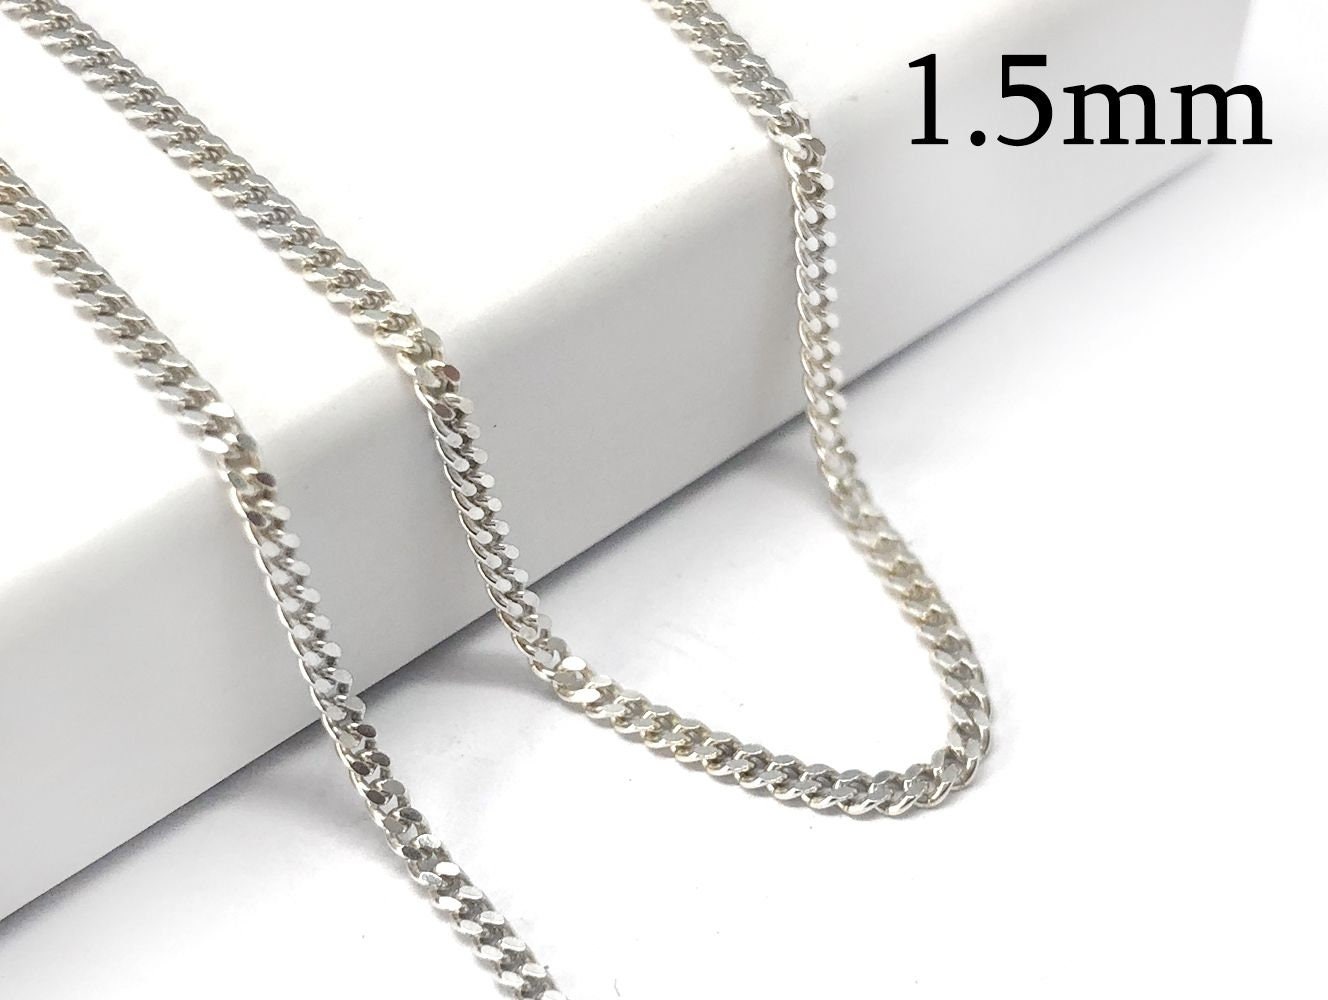 FUWE Metal Craft Chain, 1m 5 Pcs Elegant Sturdy Durable Aluminum Curb Chain  for Jewelry Making (Silver)